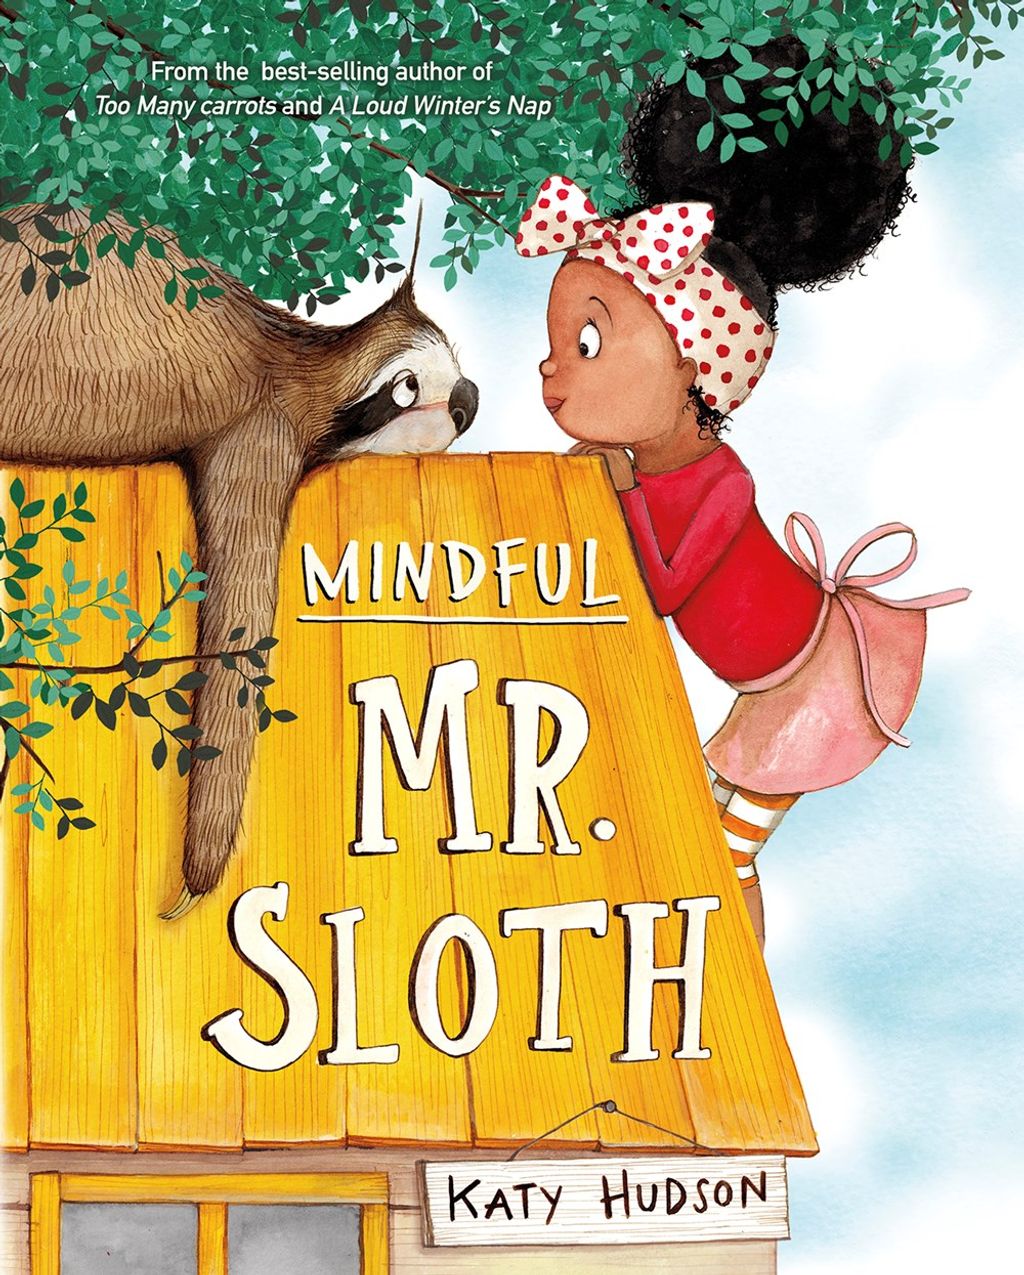 Book Cover of Mindful Mr. Sloth